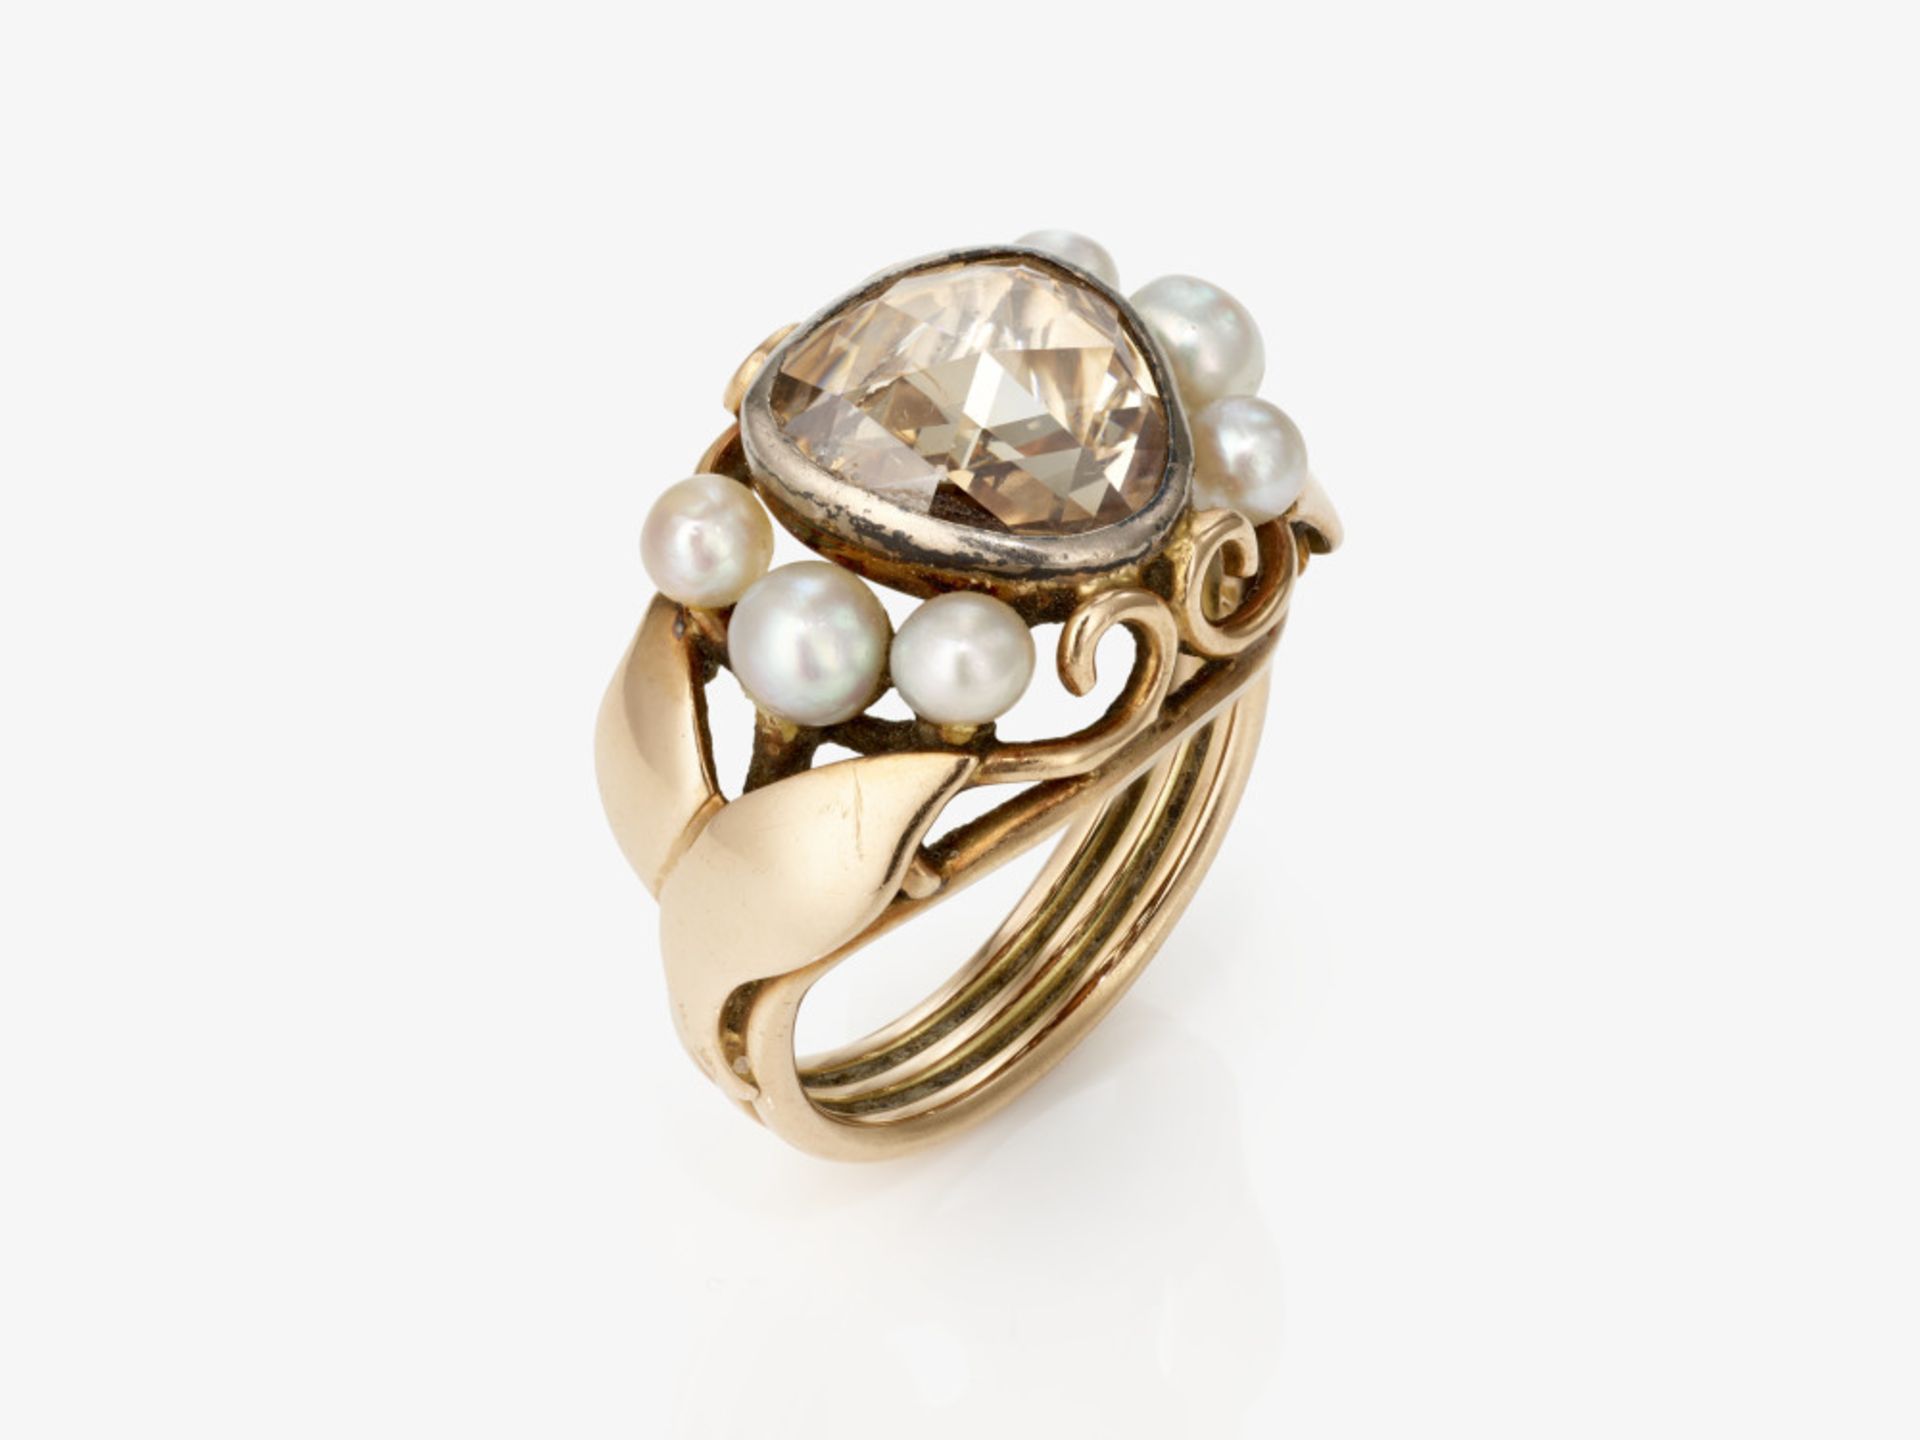 A ring with a large diamond and cultured pearls - Germany, the large diamond was cut in the 18th cen